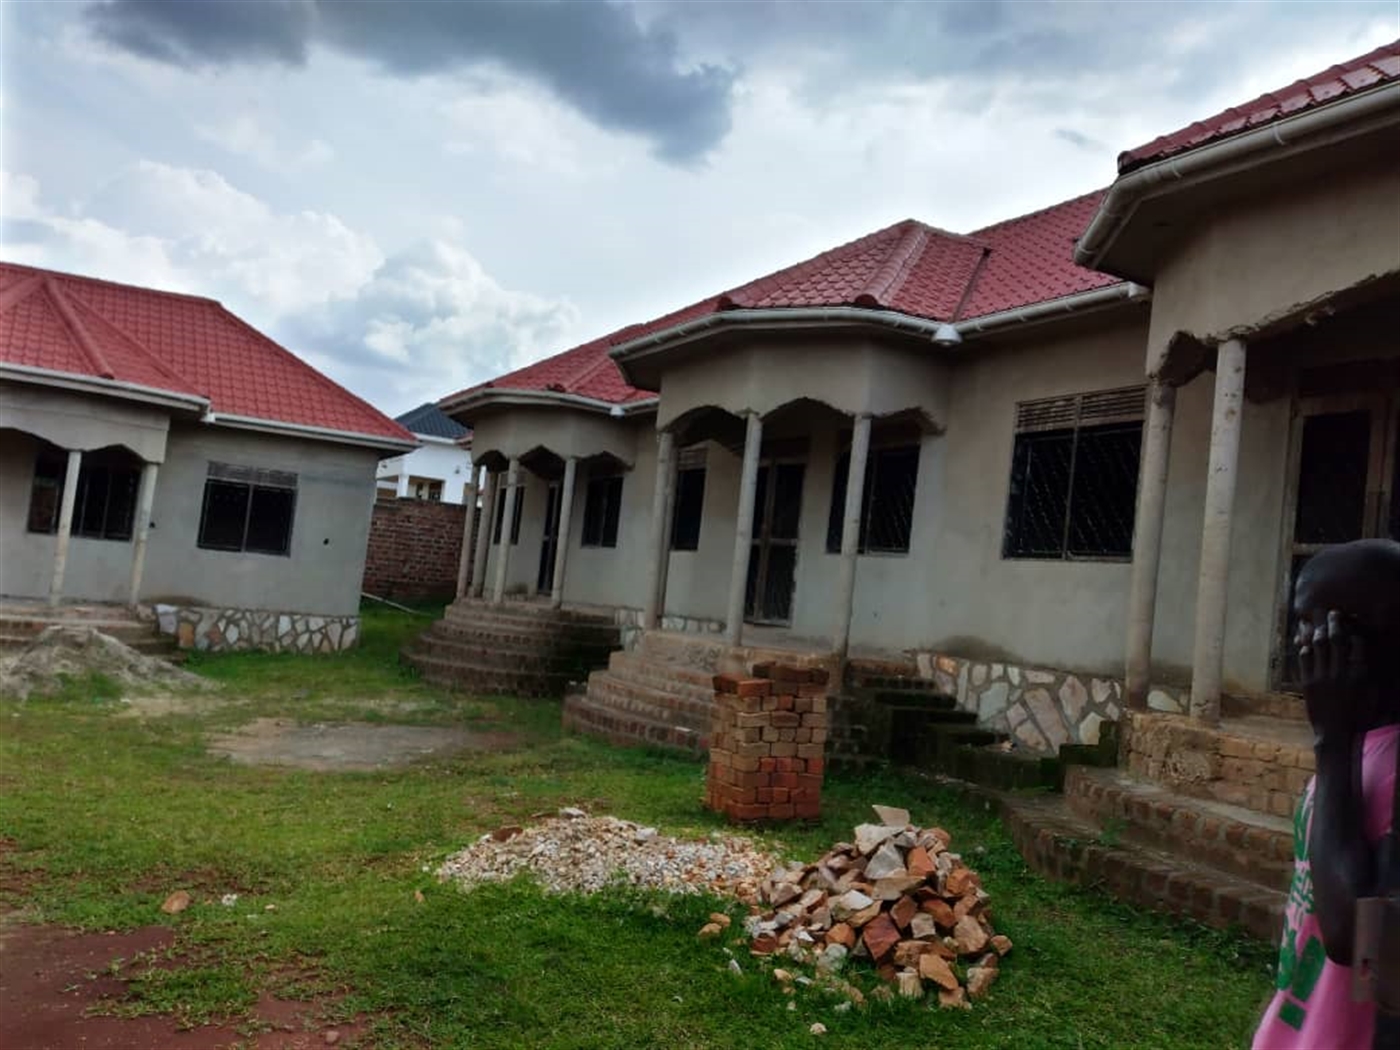 Rental units for sale in Katiso Mukono